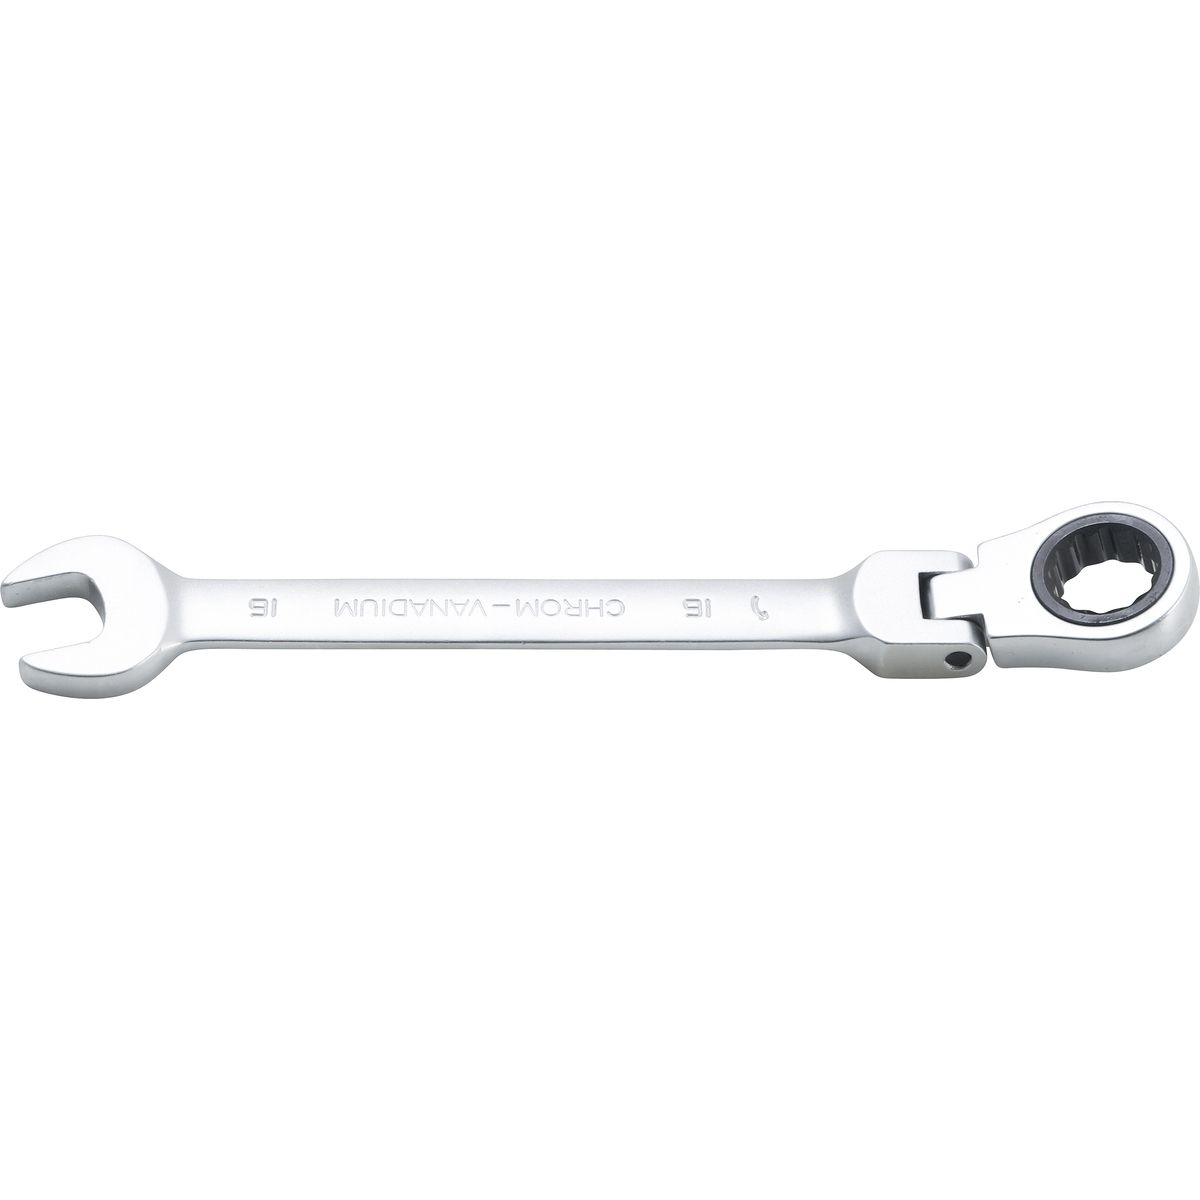 Ratchet Combination Wrench | adjustable | 16 mm